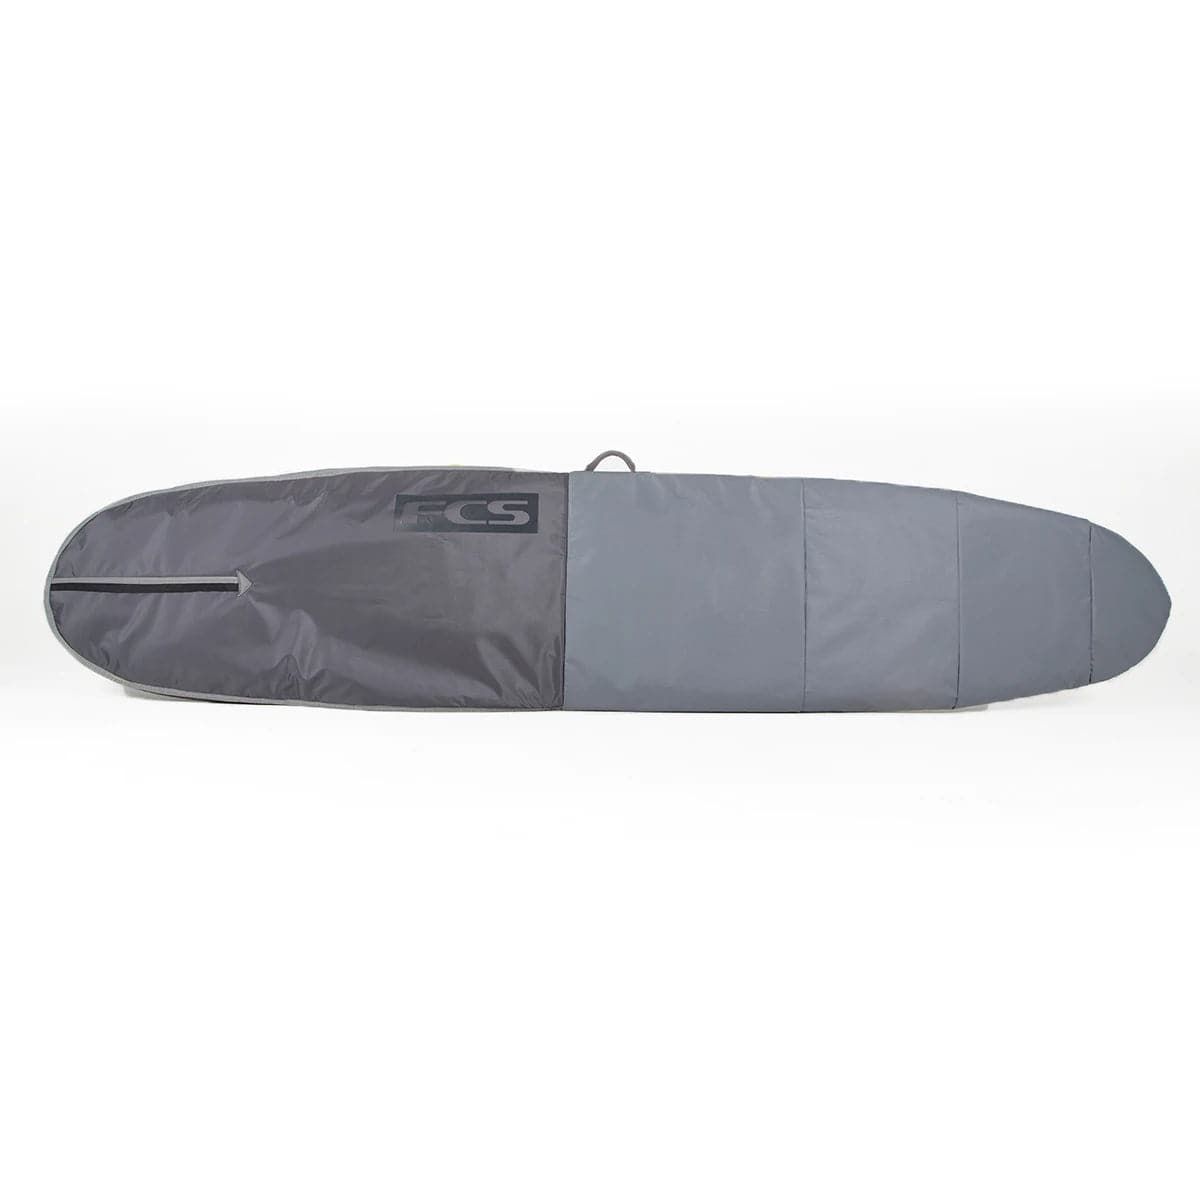 Featuring the SUP Dayrunner Bag 10'6 sup accessory, sup fin manufactured by FCS shown here from one angle.